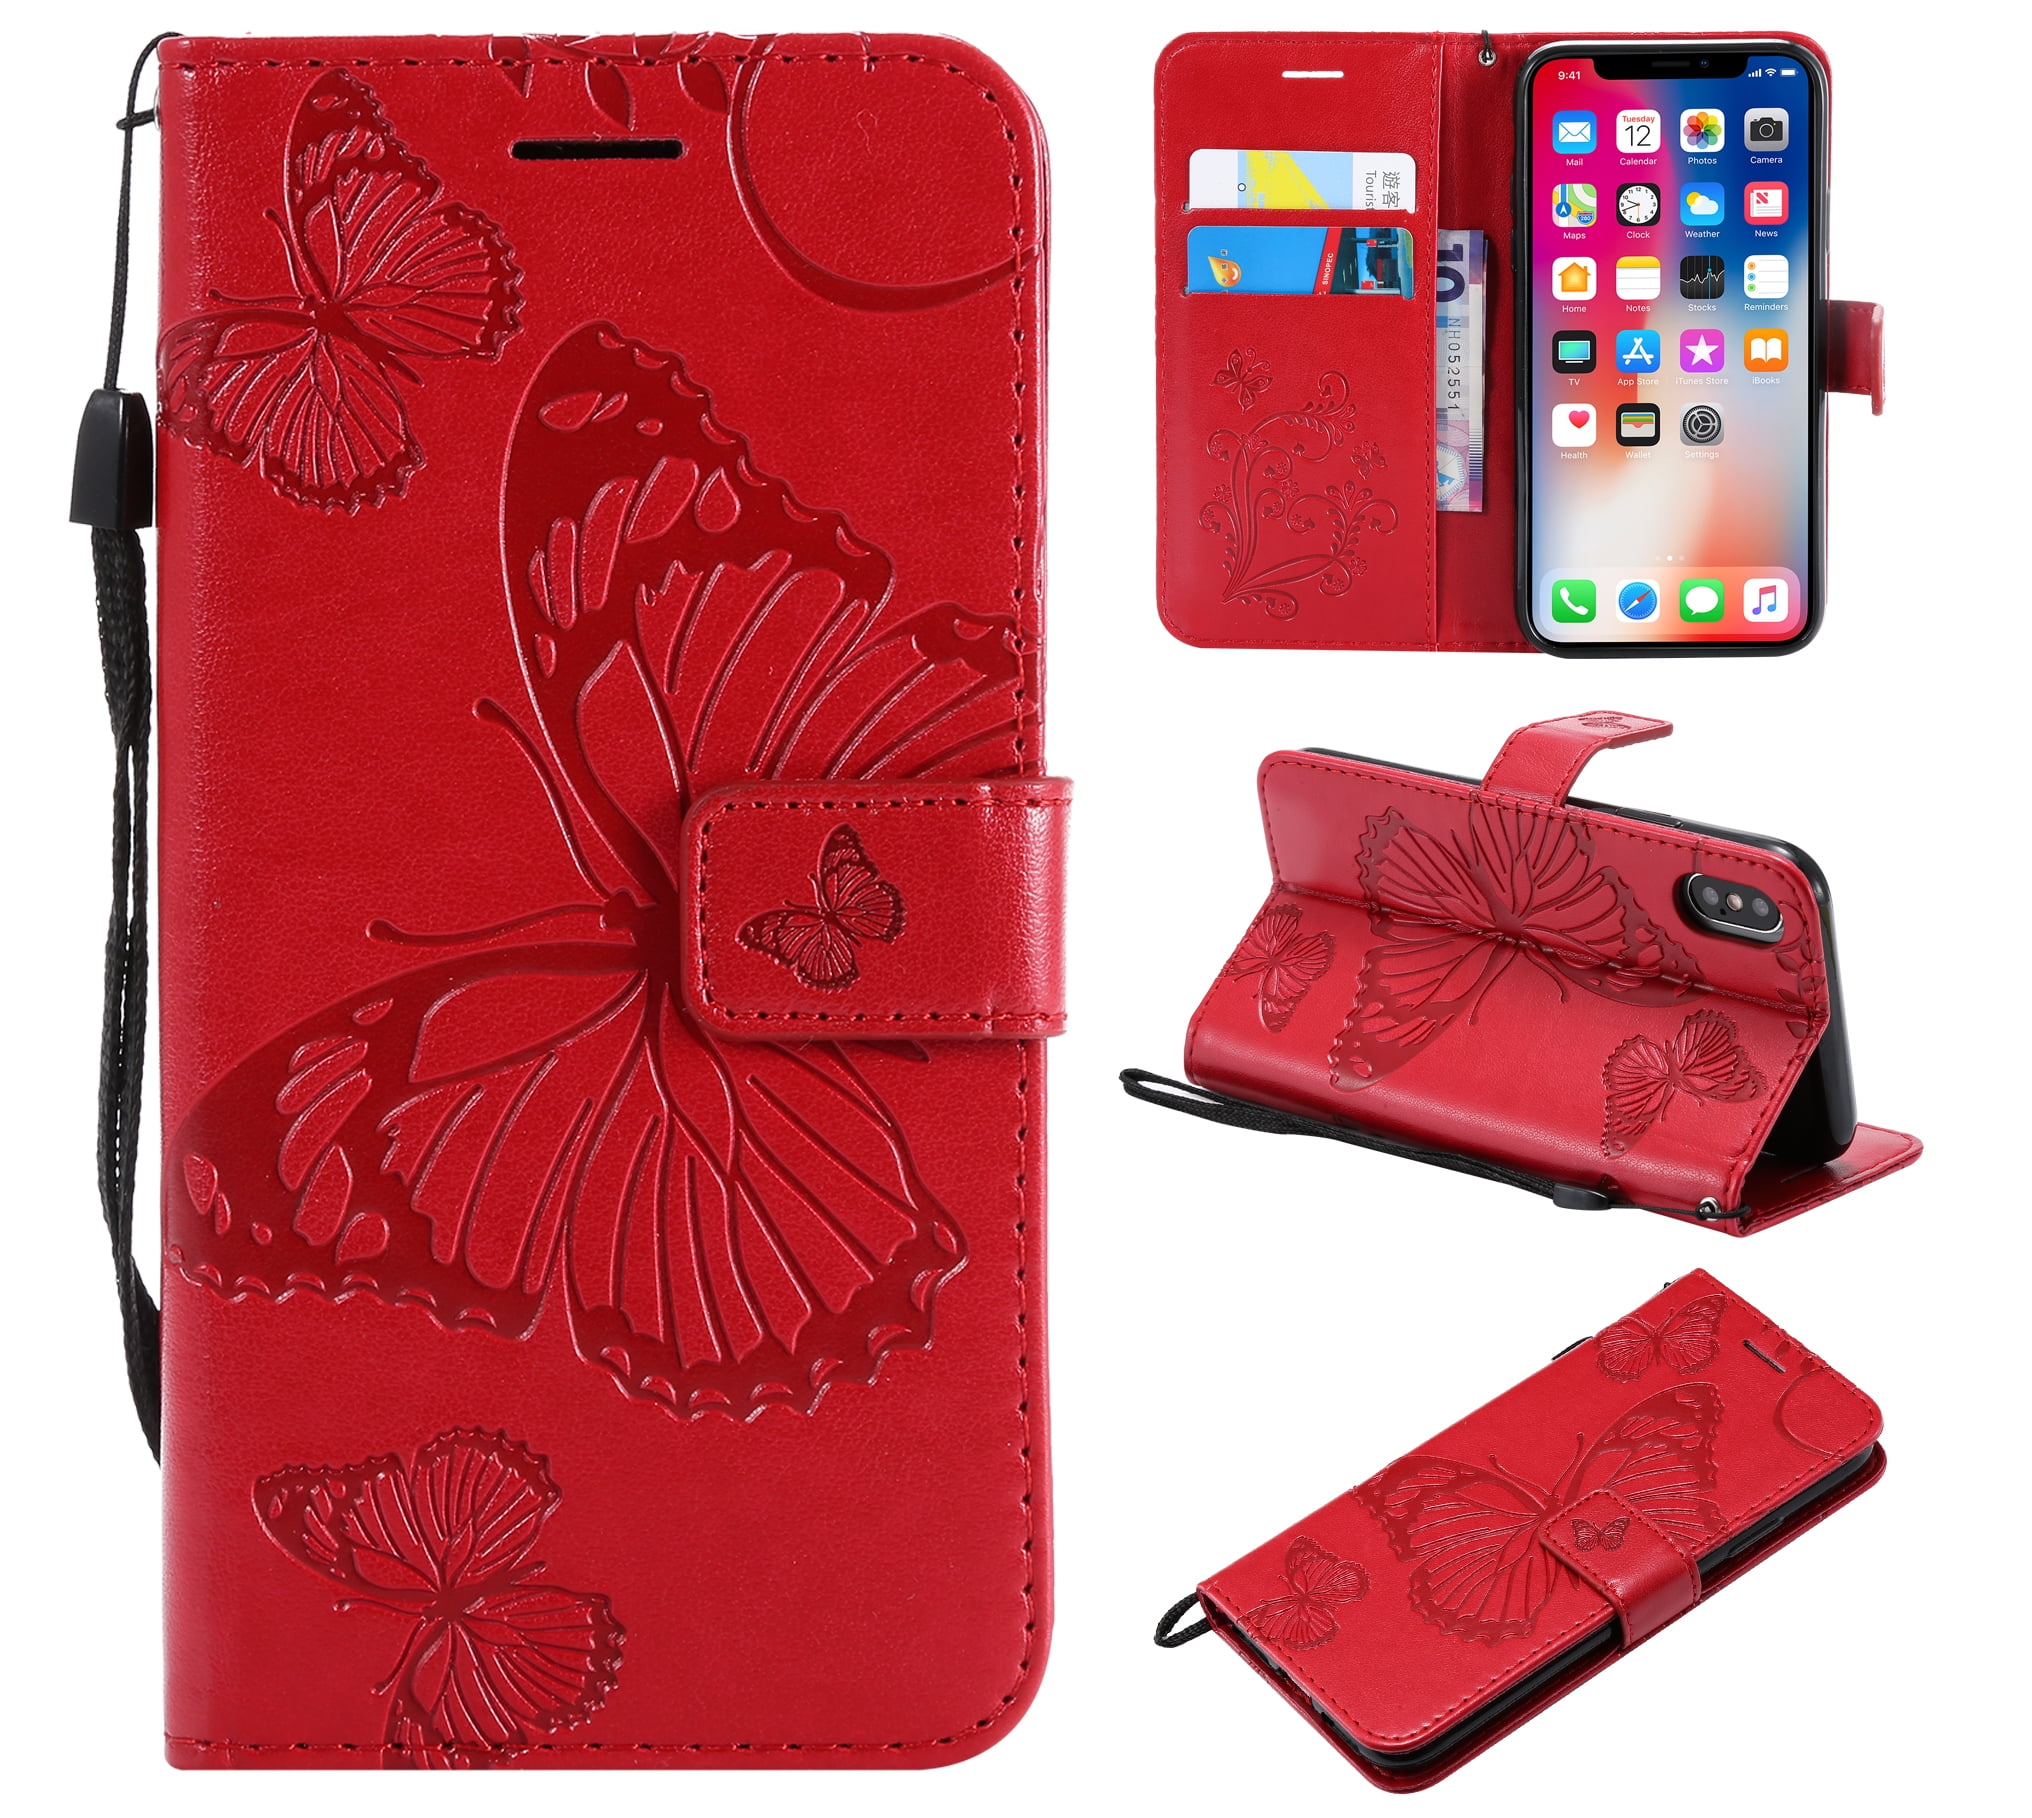 Grey PHEZEN Case for iPhone XR Wallet Case,Embossing Mandala Flower PU Leather Magnetic Folio Flip Case Full Body Protective Phone Case Cover with Stand Card Slot Wrist Strap for iPhone XR